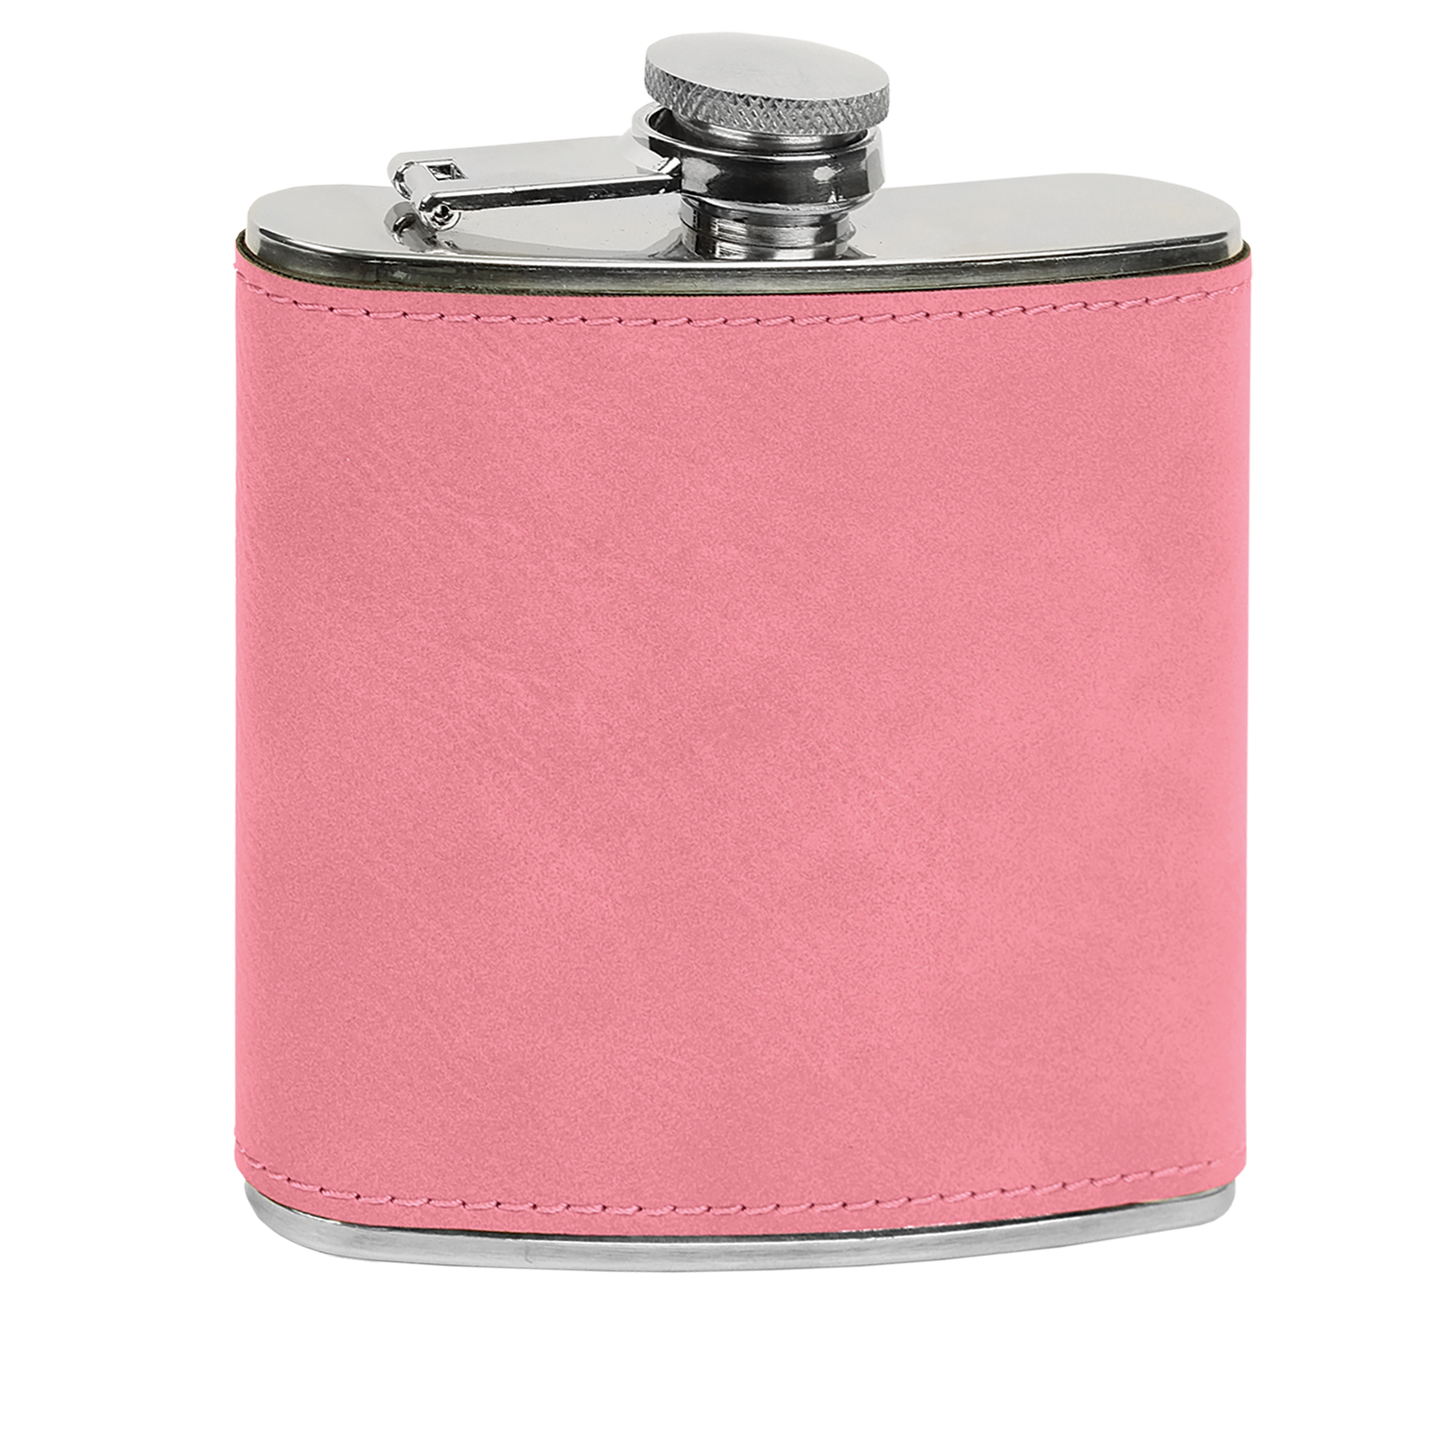 Personalized Flask Set